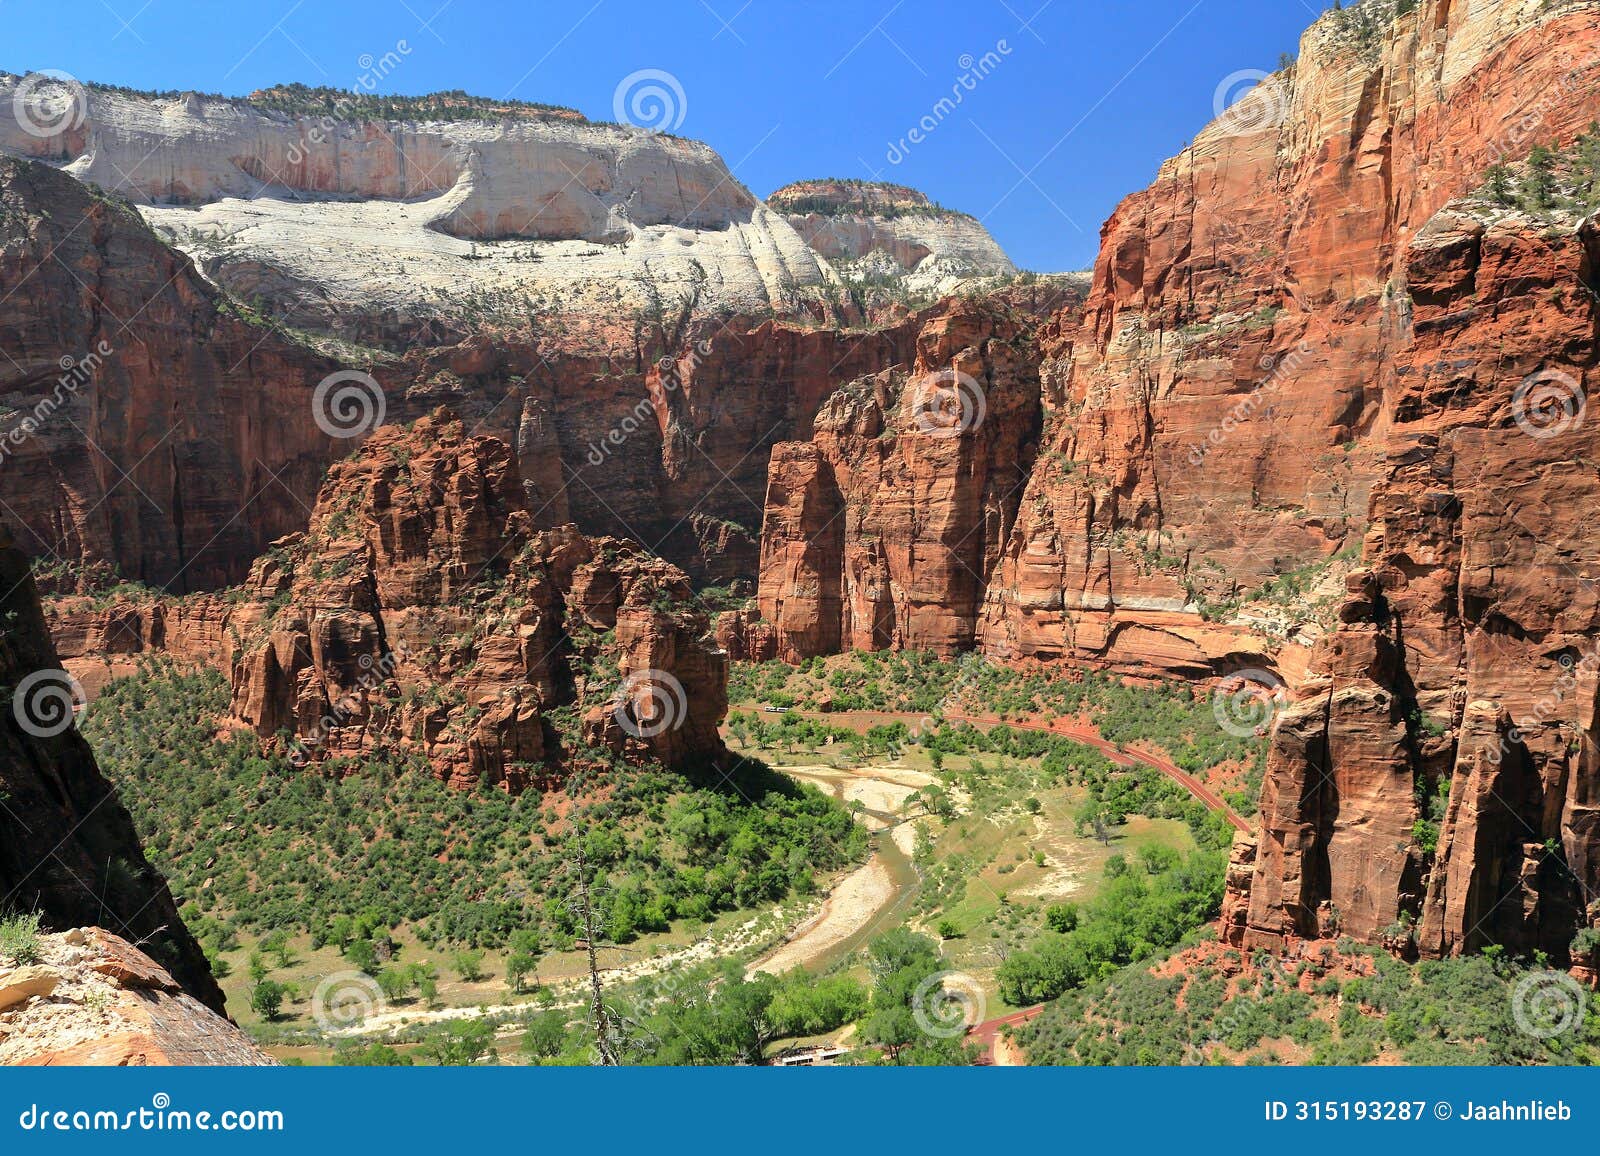 zion national park with virgin river canyon and the organ from observation point trail, utah